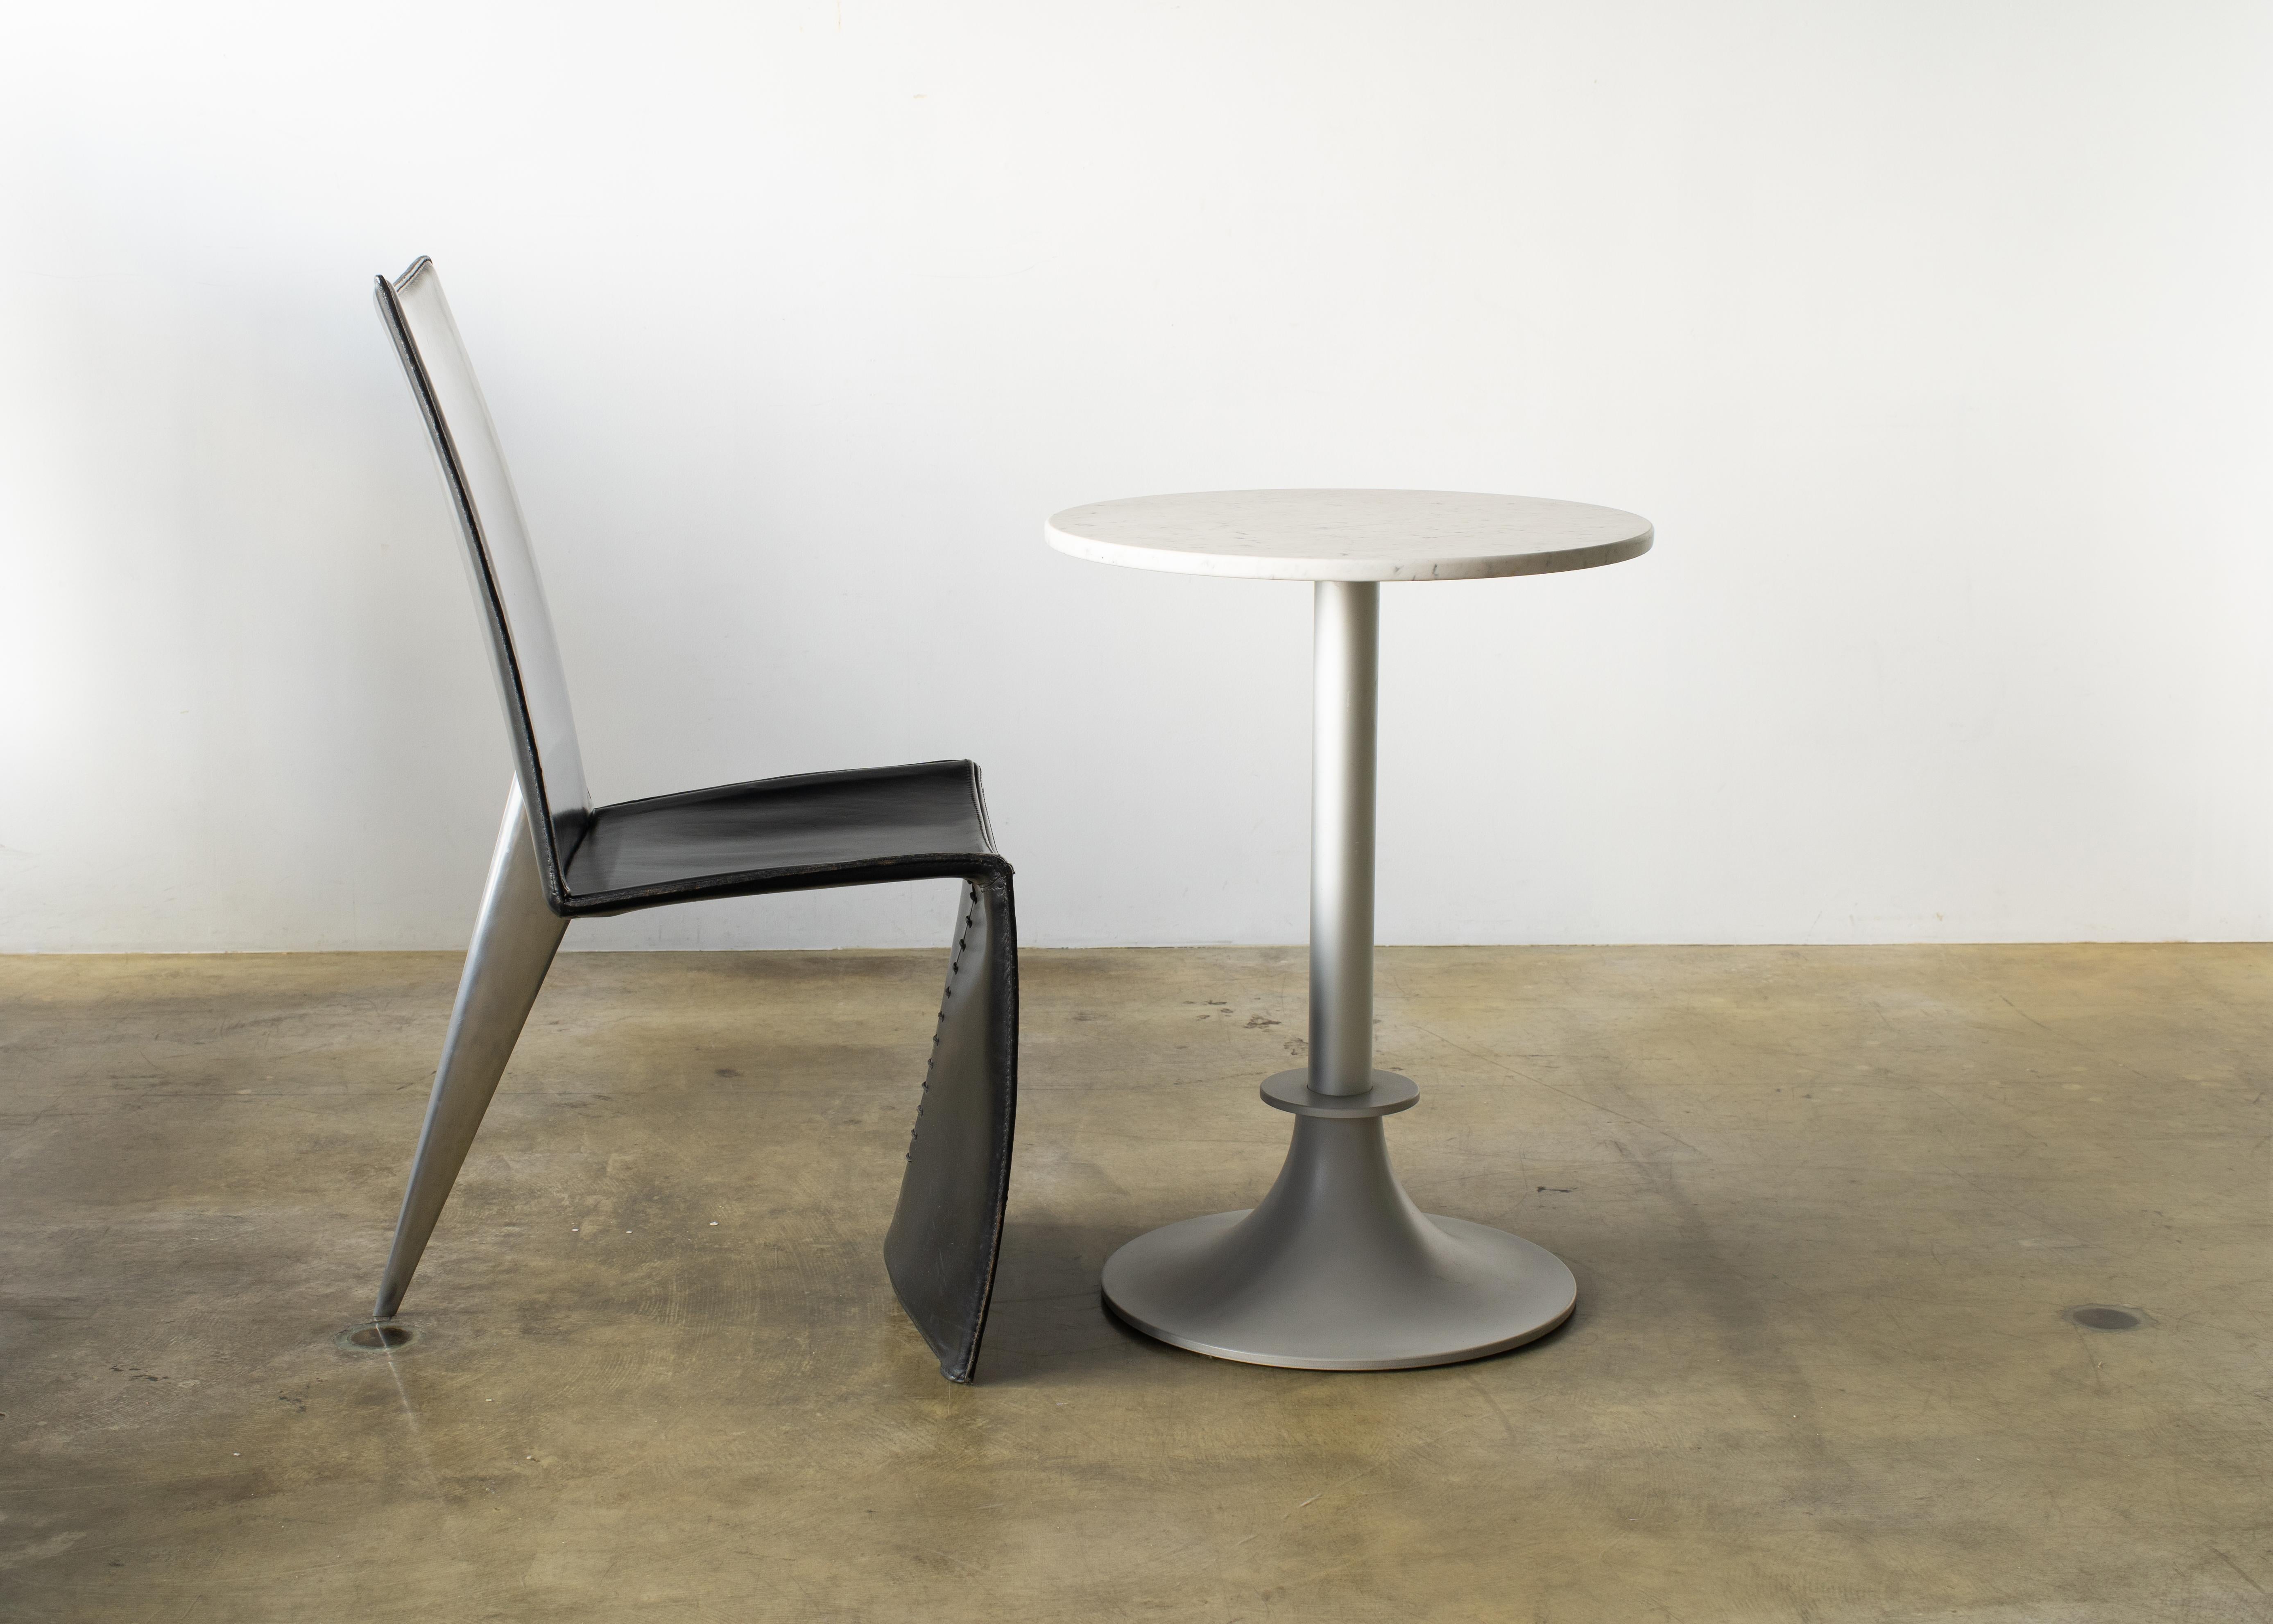 Lord Yi table designed by Philippe Starck for Driade.
White marble top and aluminum leg.
 